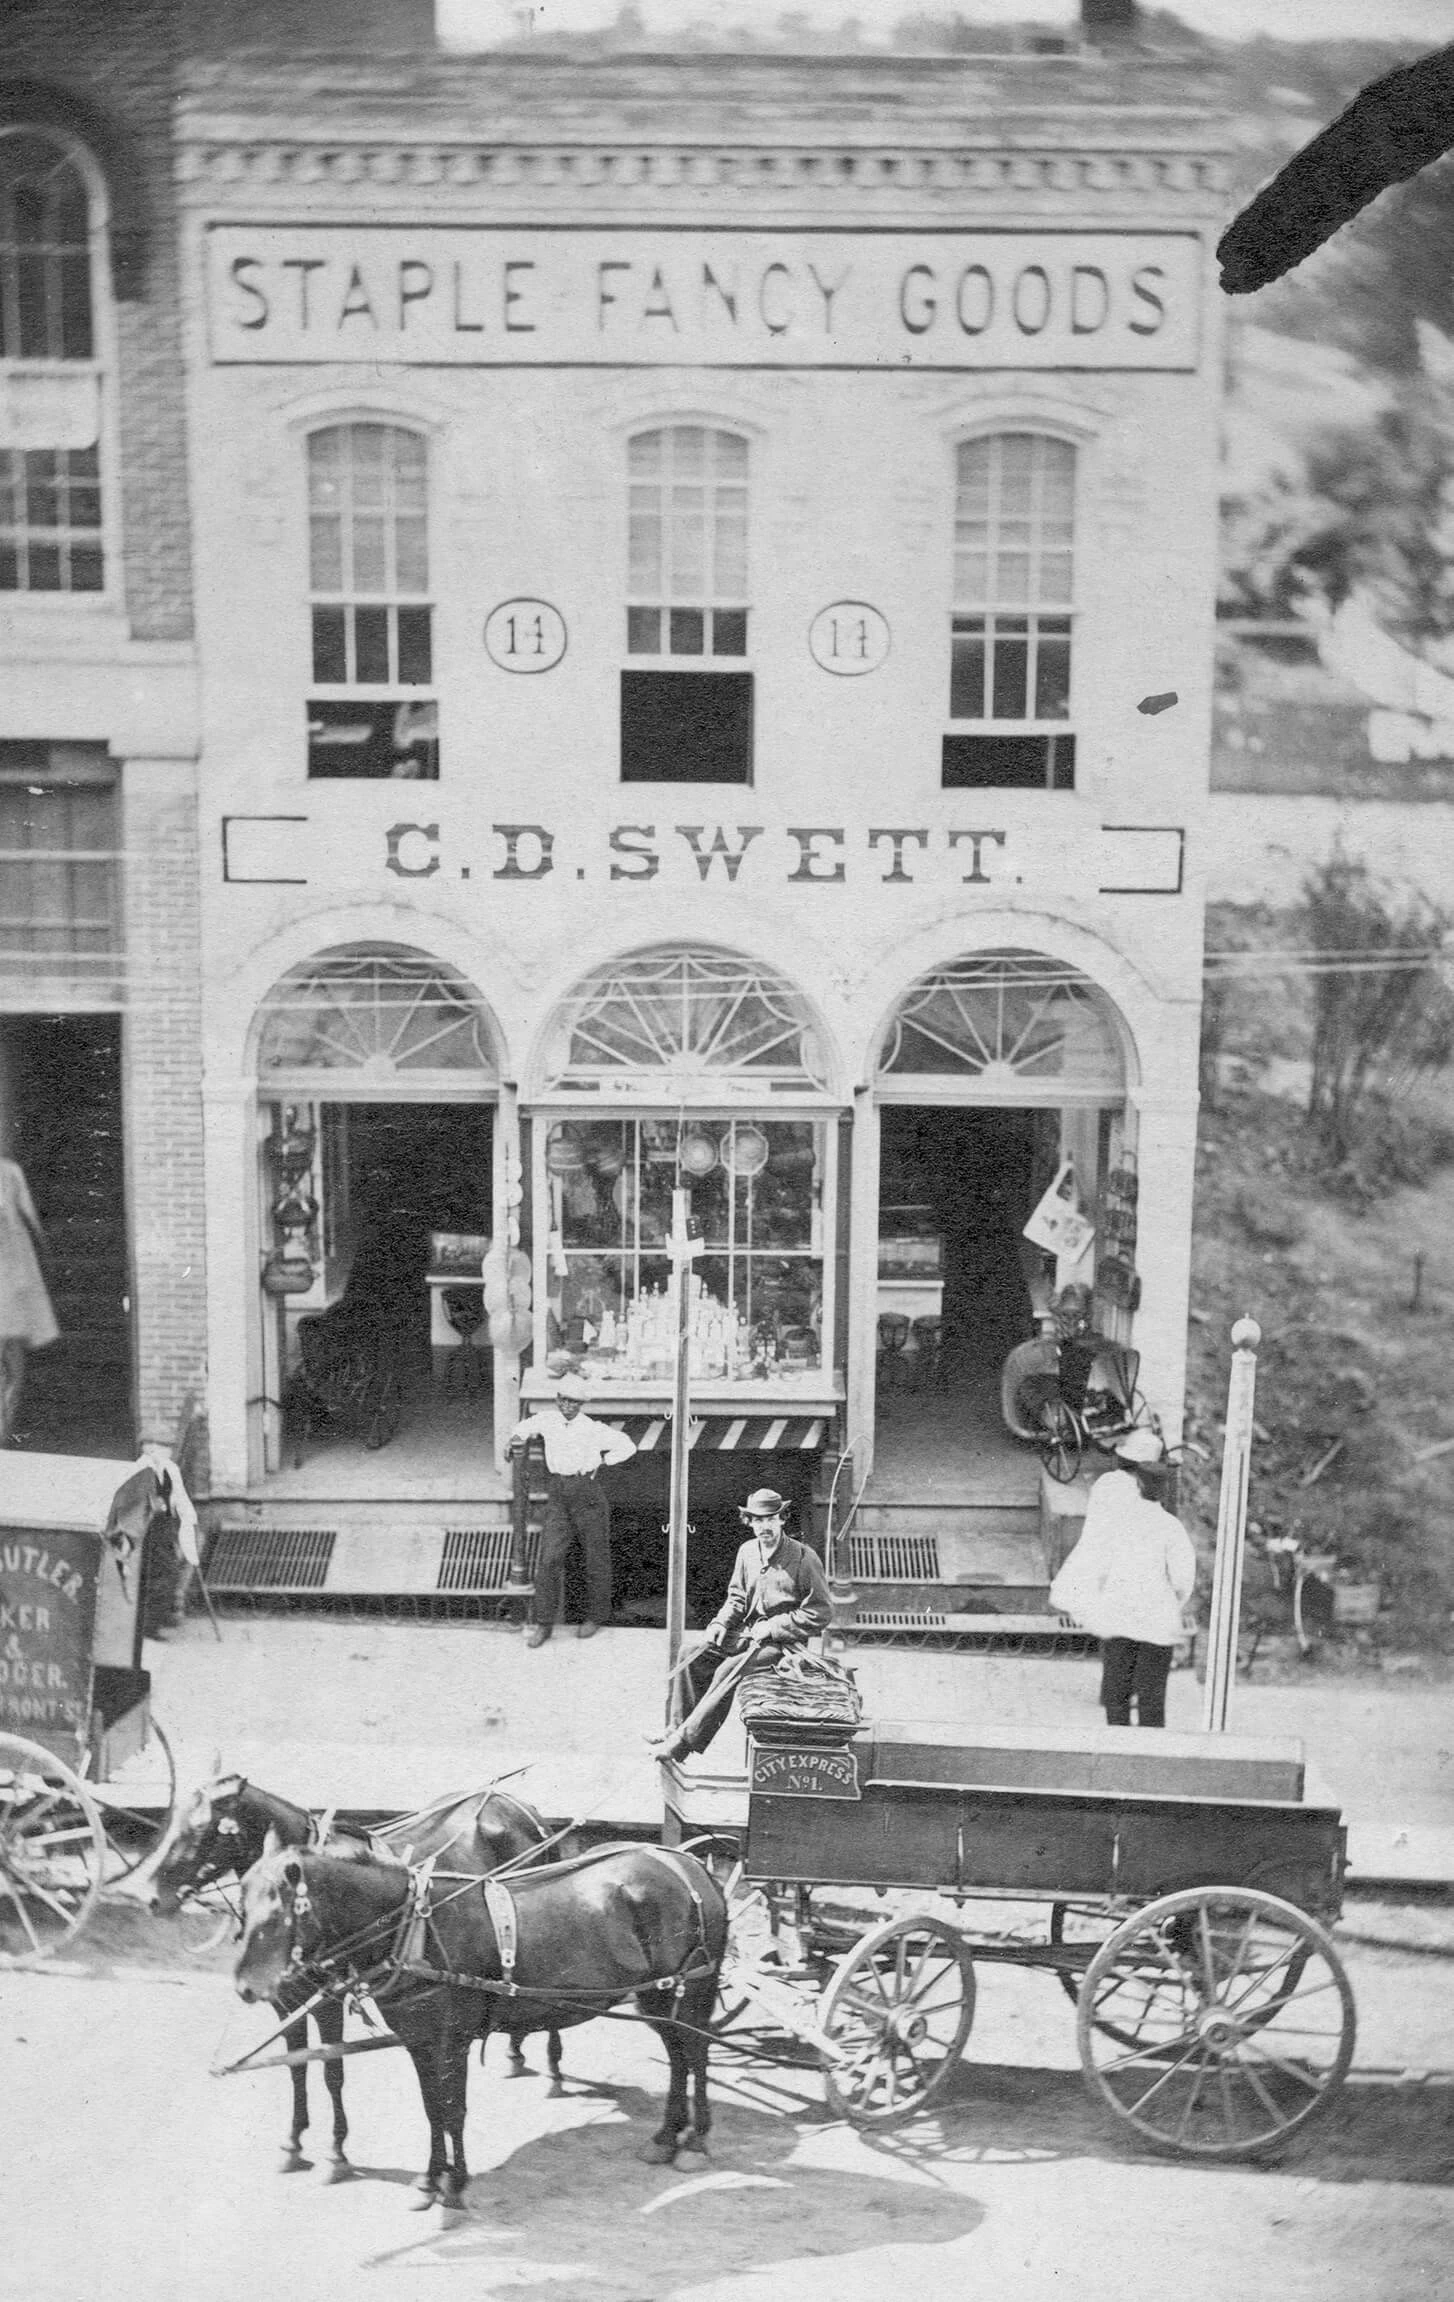 A man sitting in a carriage pulled by two horses is on the street outside of a two story brick building. The building has three large arched windows for the storefront on the first floor.